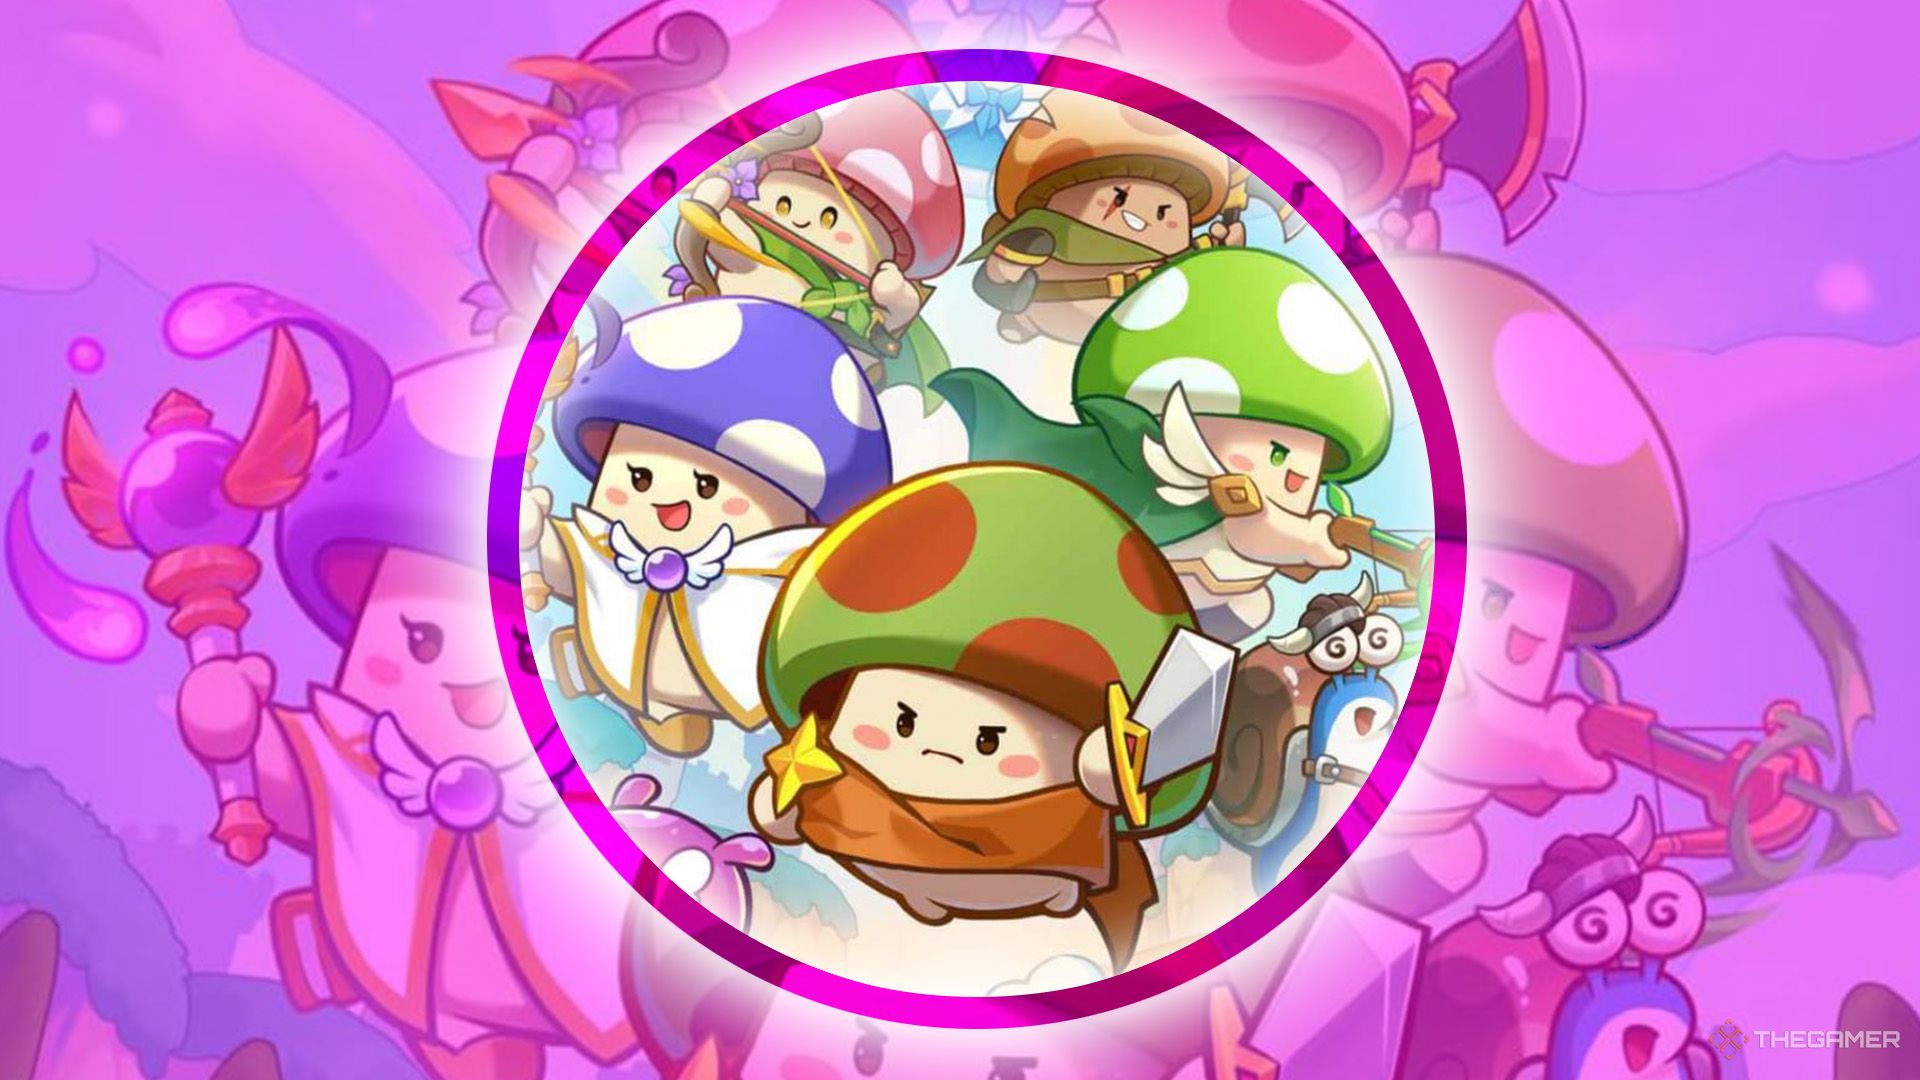 Legend of Mushroom - Various mushrooms are ready for adventure displayed on pink bacground